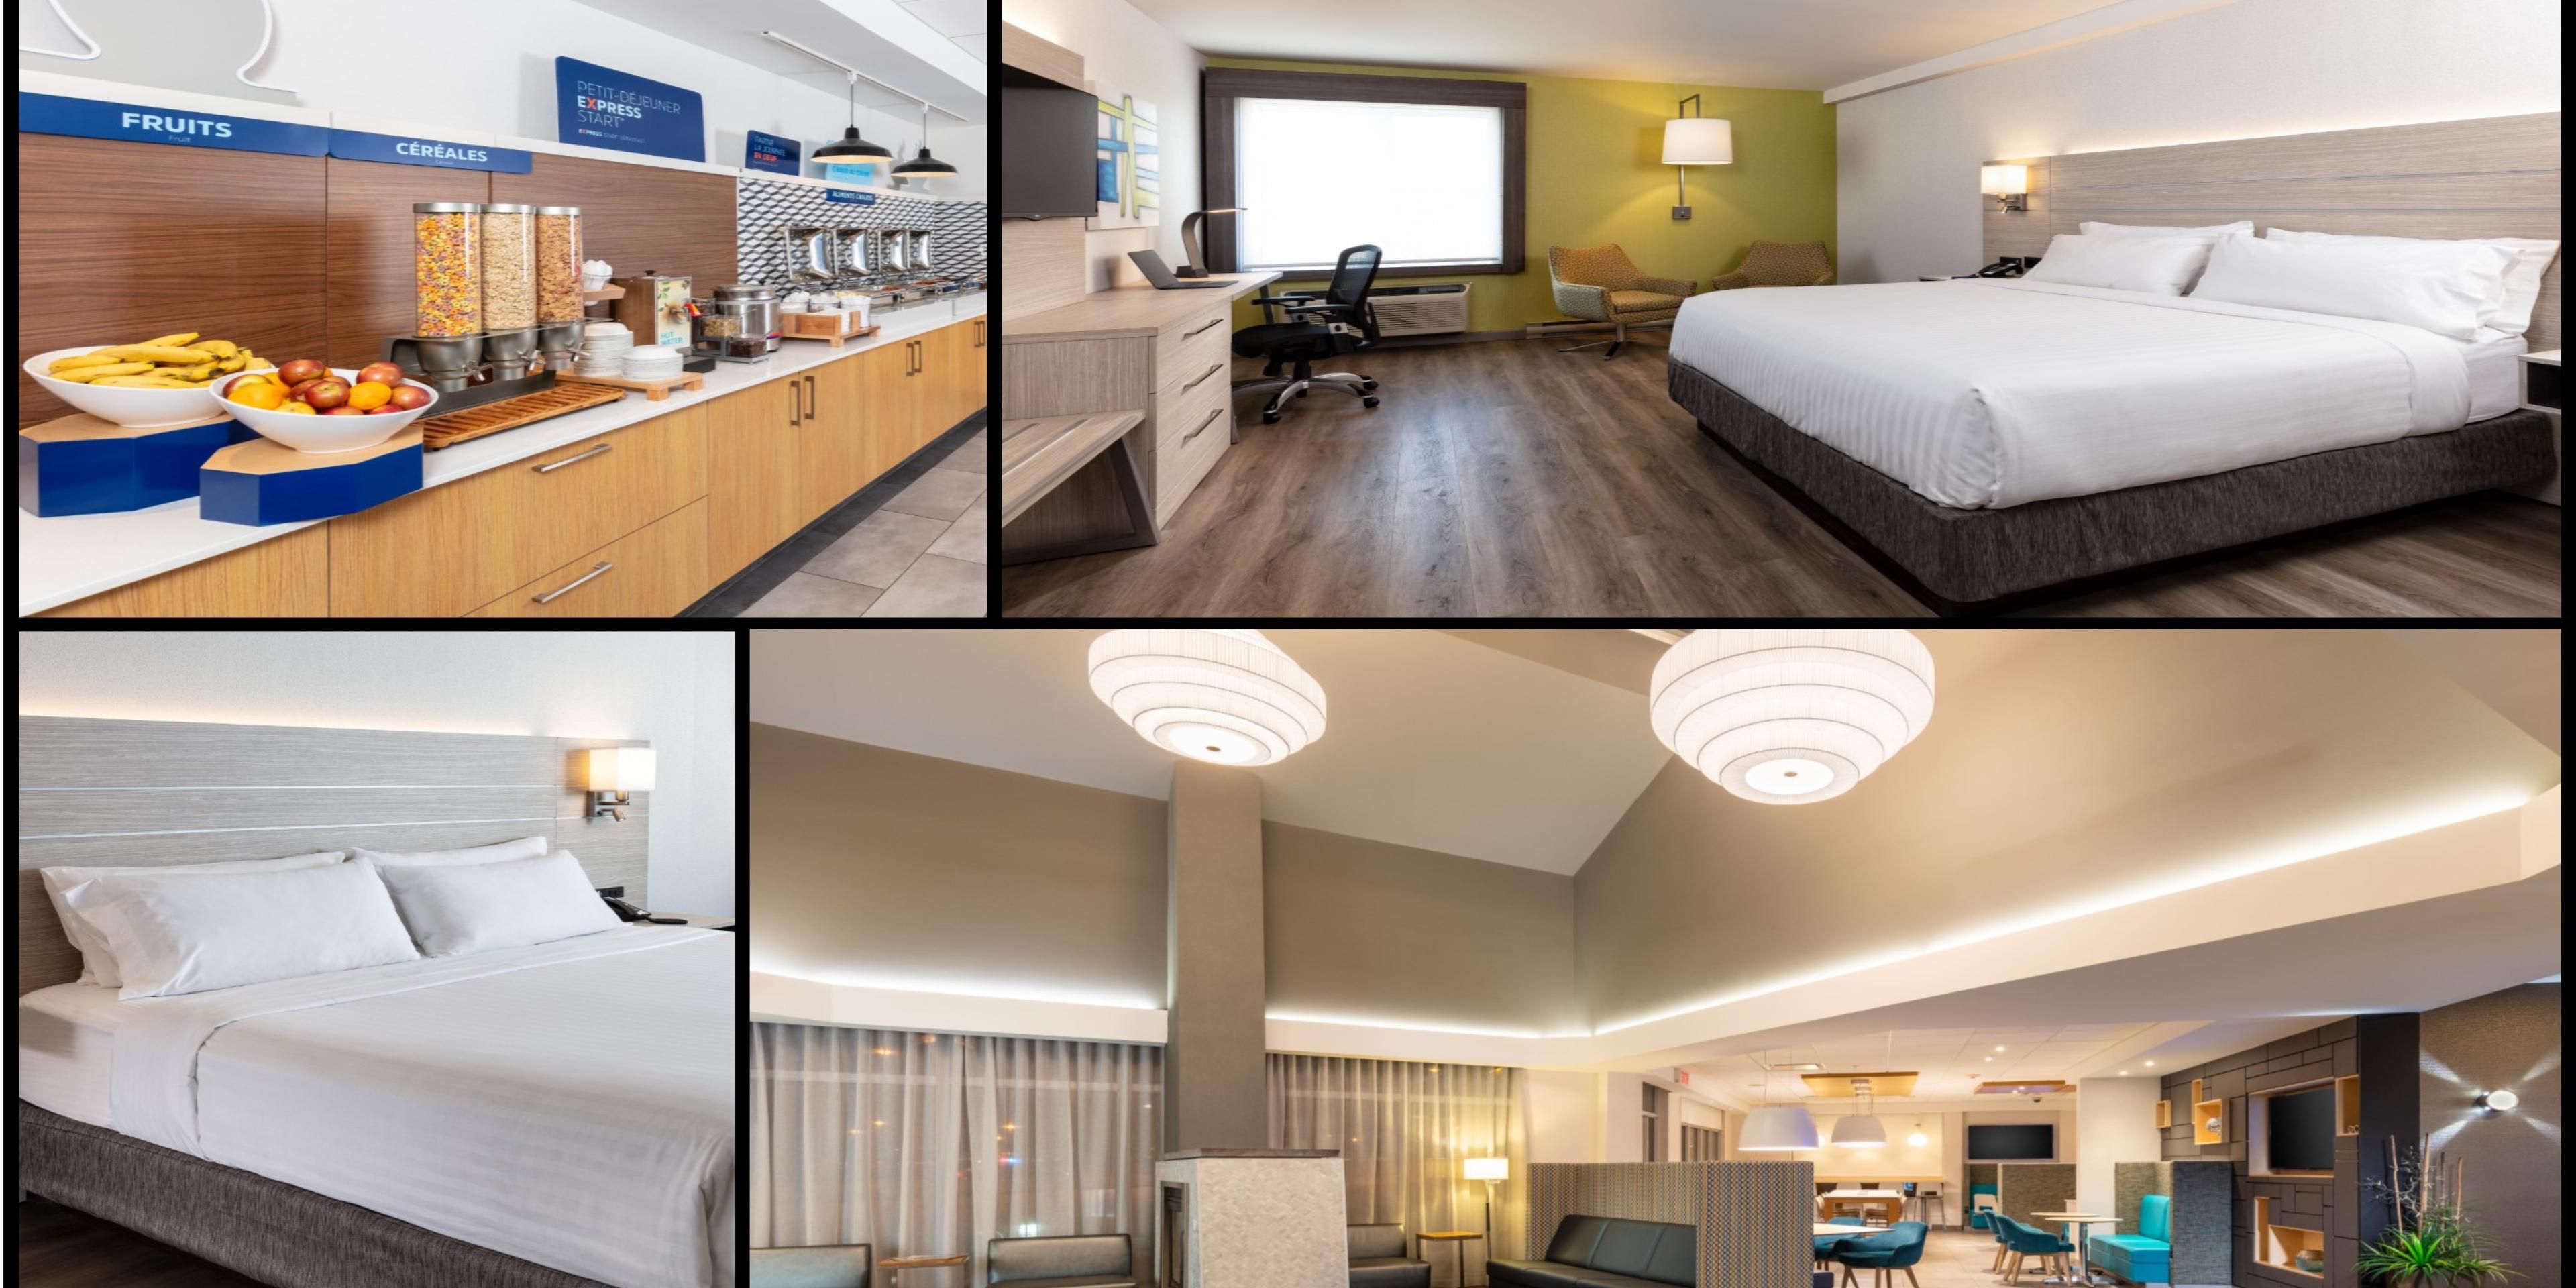 New modern design according to the latest quality standards of the IHG brand. Business or leisure guests will be charmed!